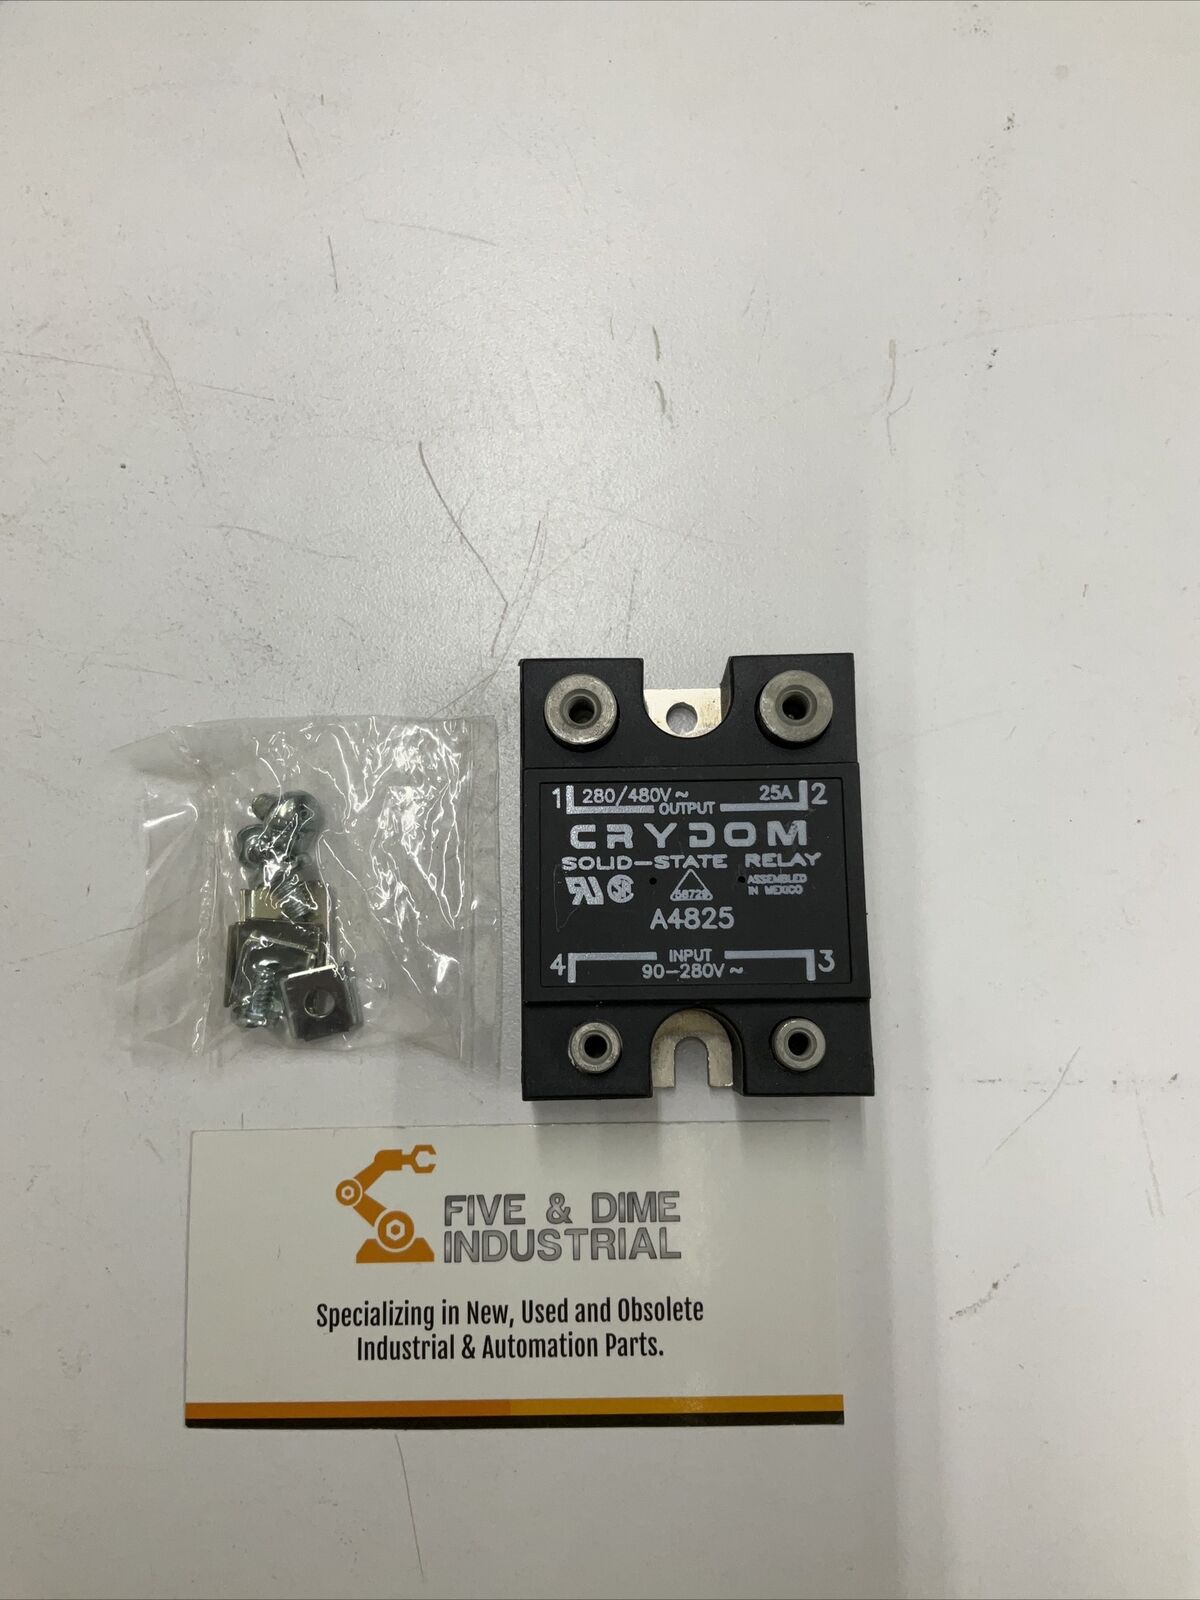 Crydom A4825 New Solid State Relay Input 90-280AC, Output 280/480VAC 25A (CL327)